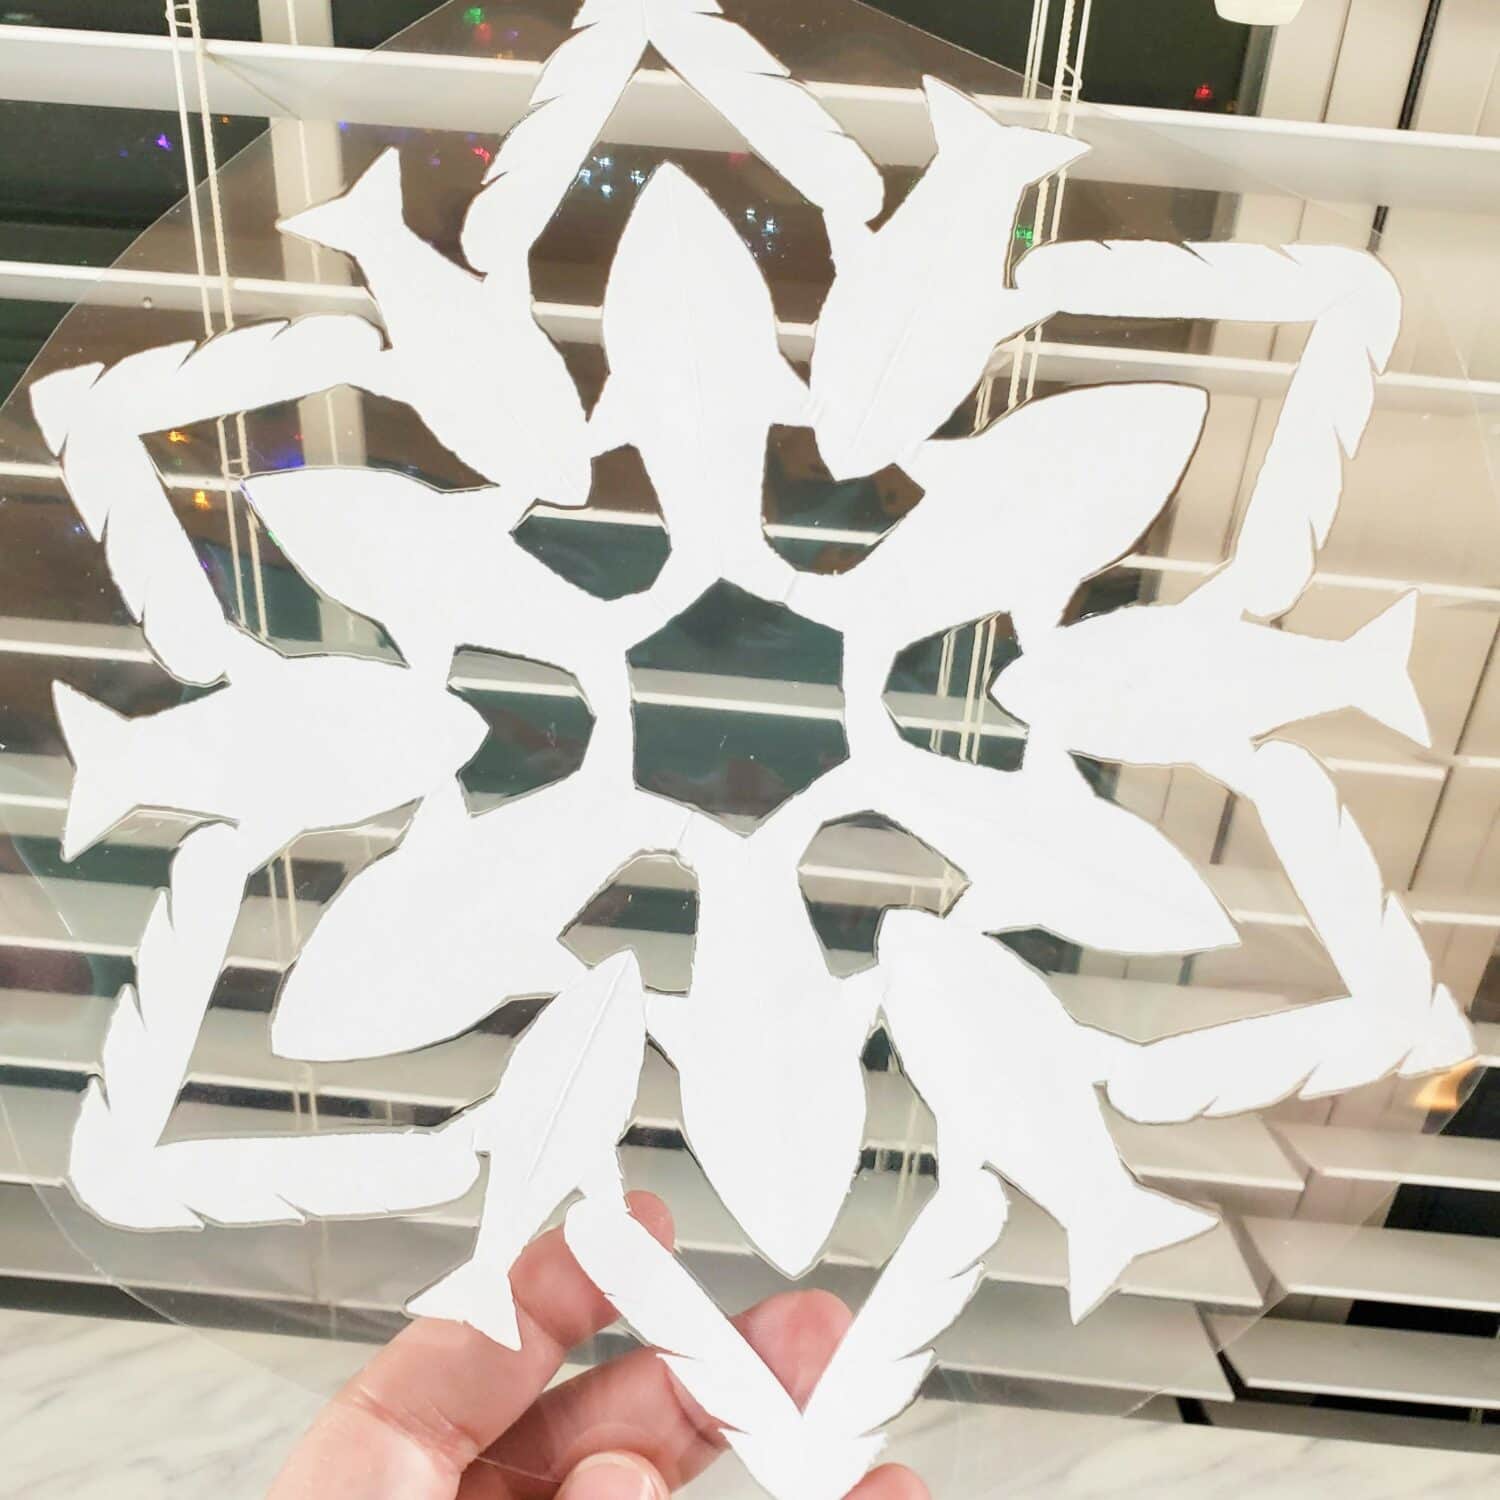 Primary Song Snowflakes easy singing time idea to introduce a variety of songs for winter!